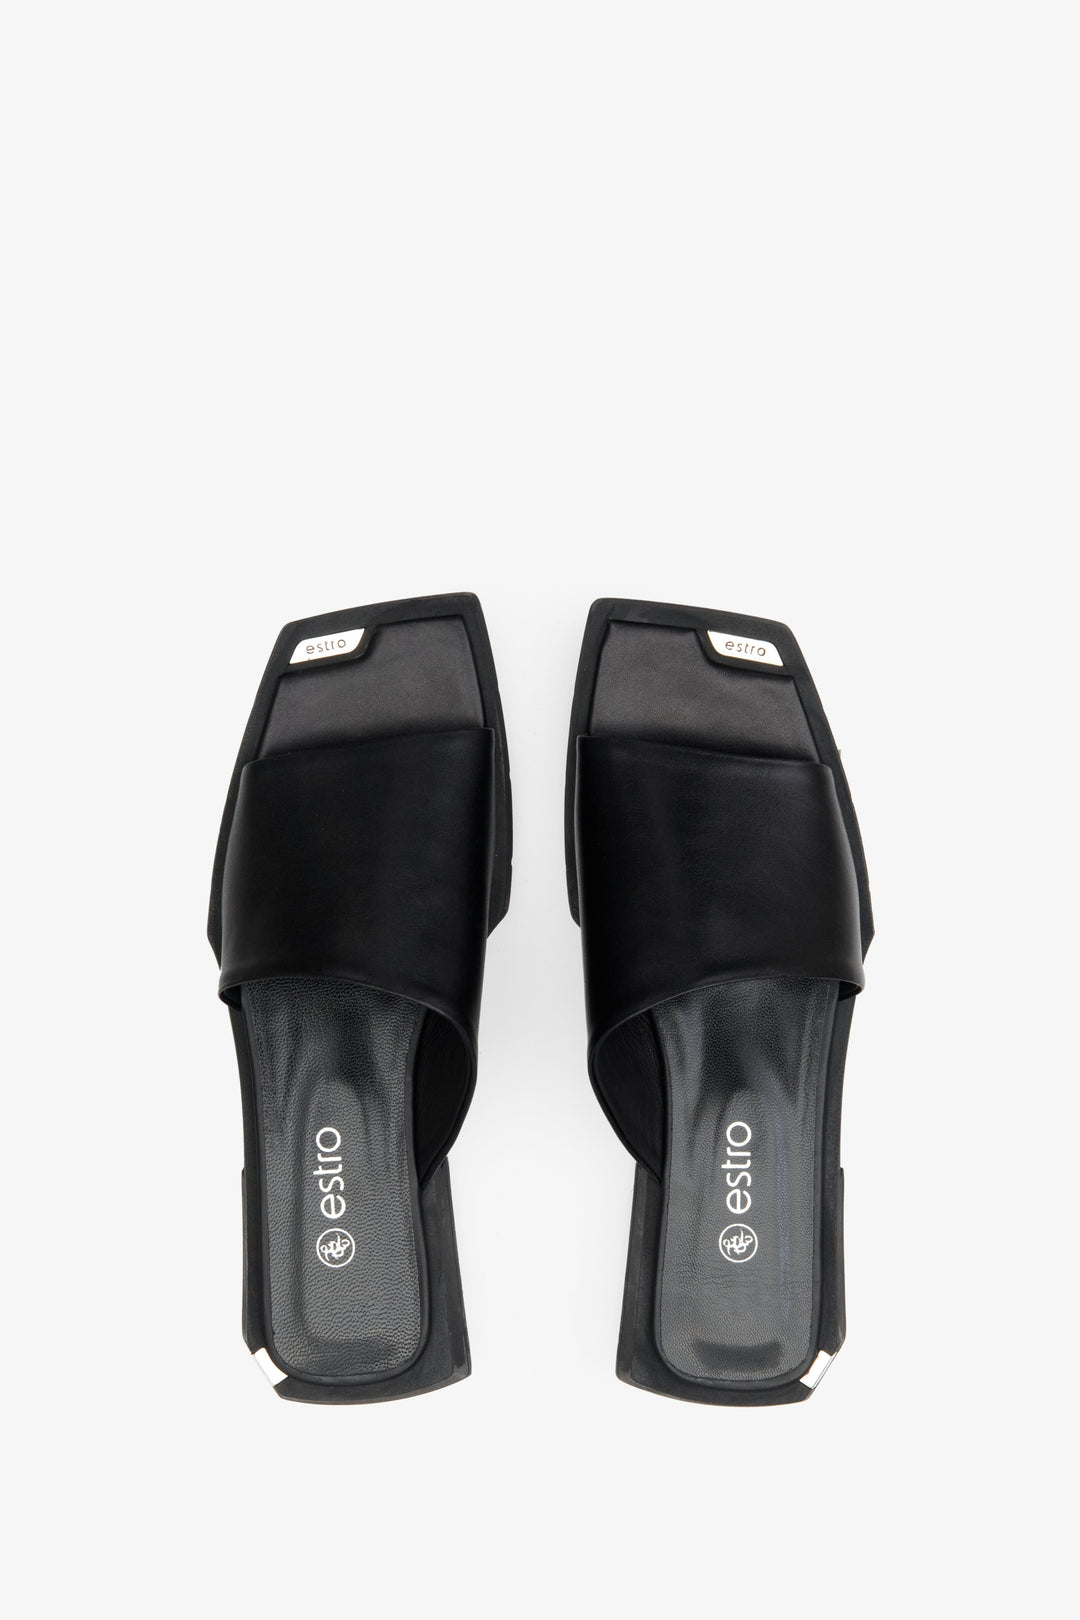 Women's leather mules for summer in black - presentation of the back of the model.